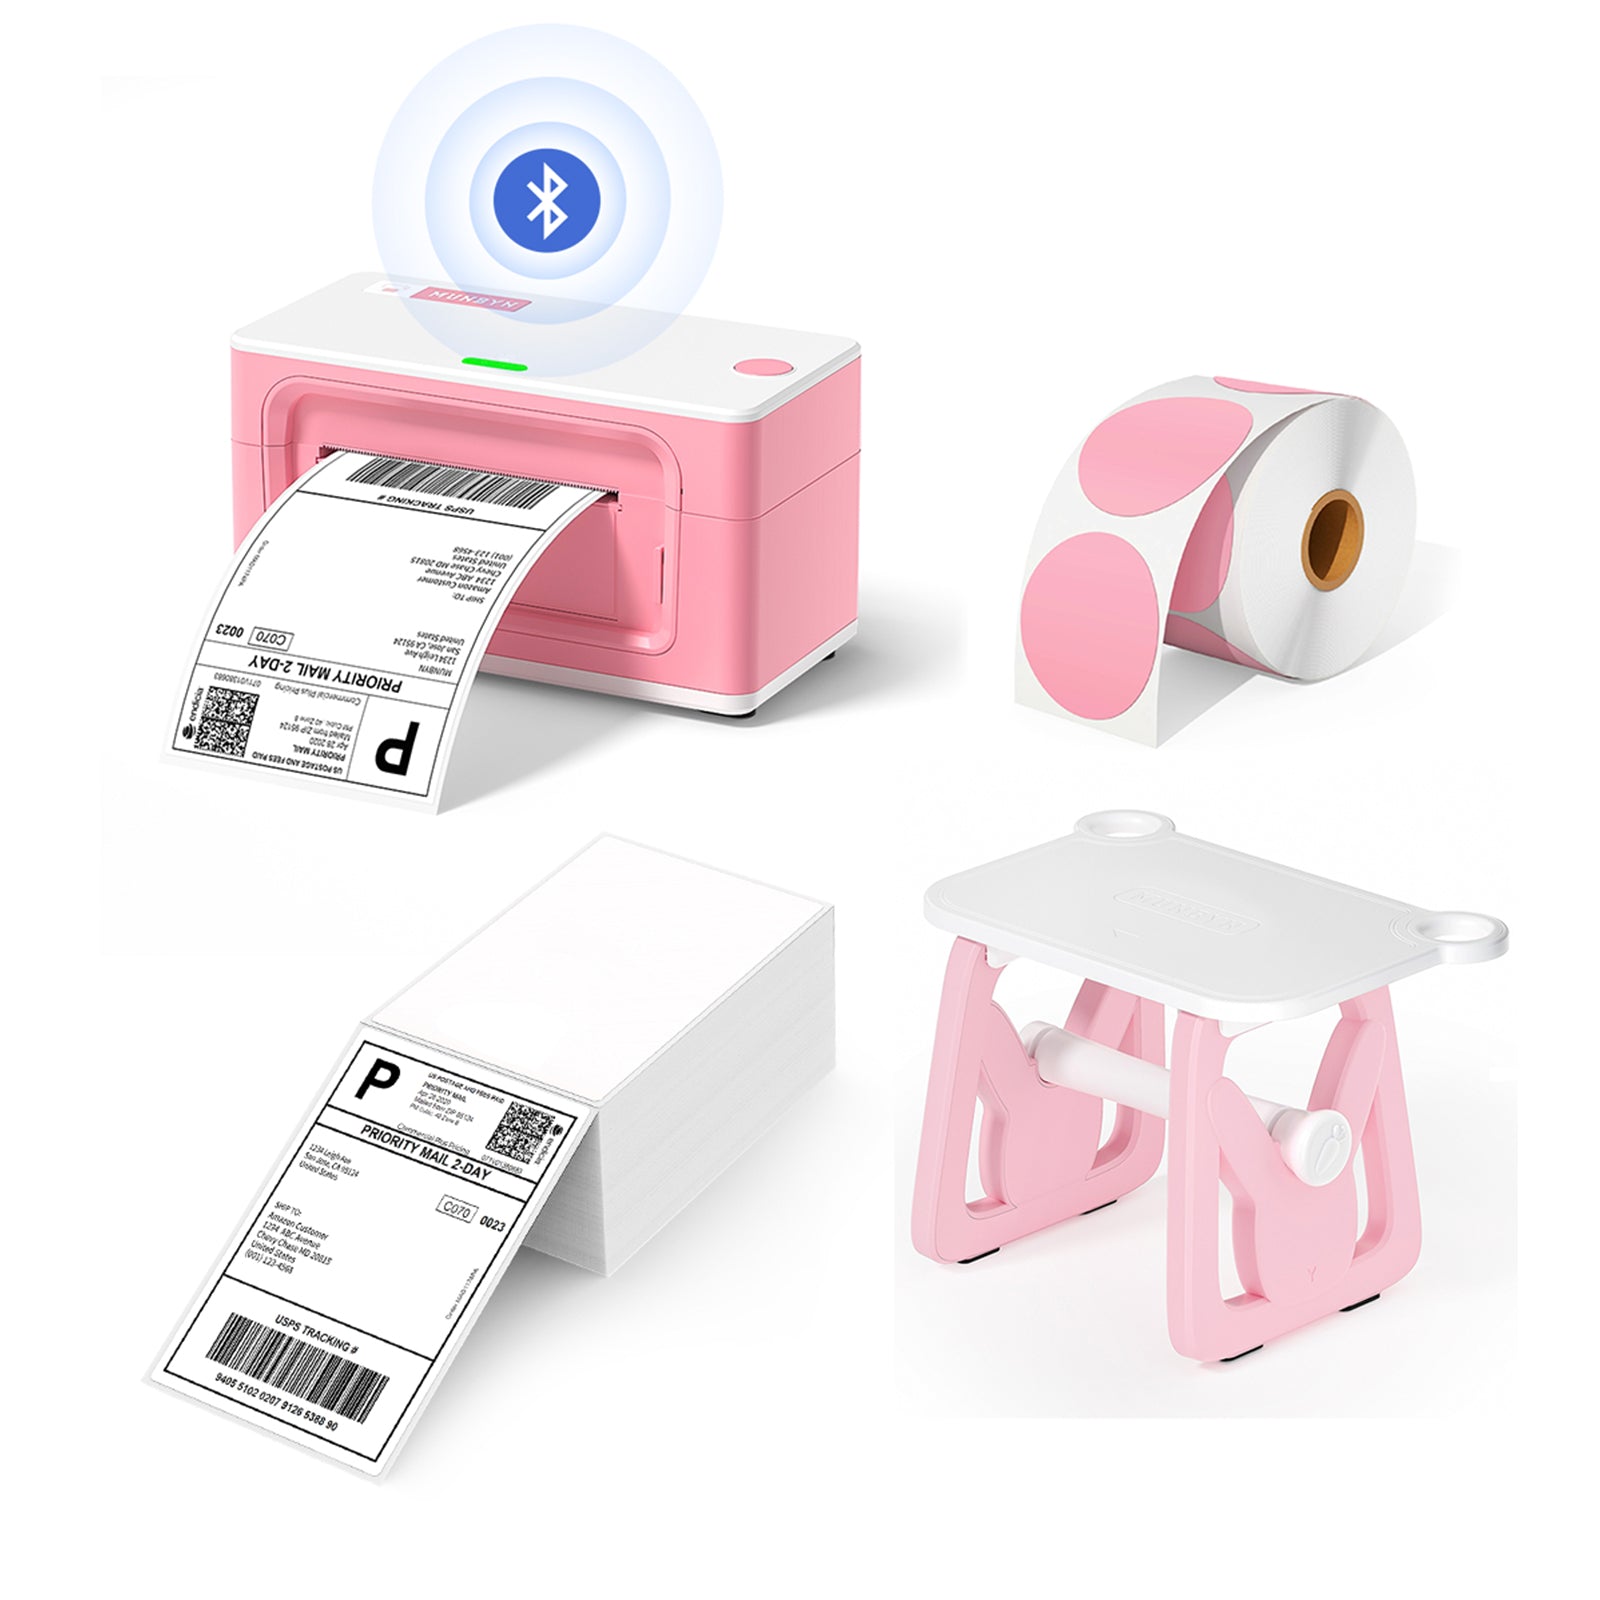 The bundle includes a Bluetooth thermal printer, a multifunctional MUNBYN pink label holder, a stack of shipping labels, and a roll of thermal labels.